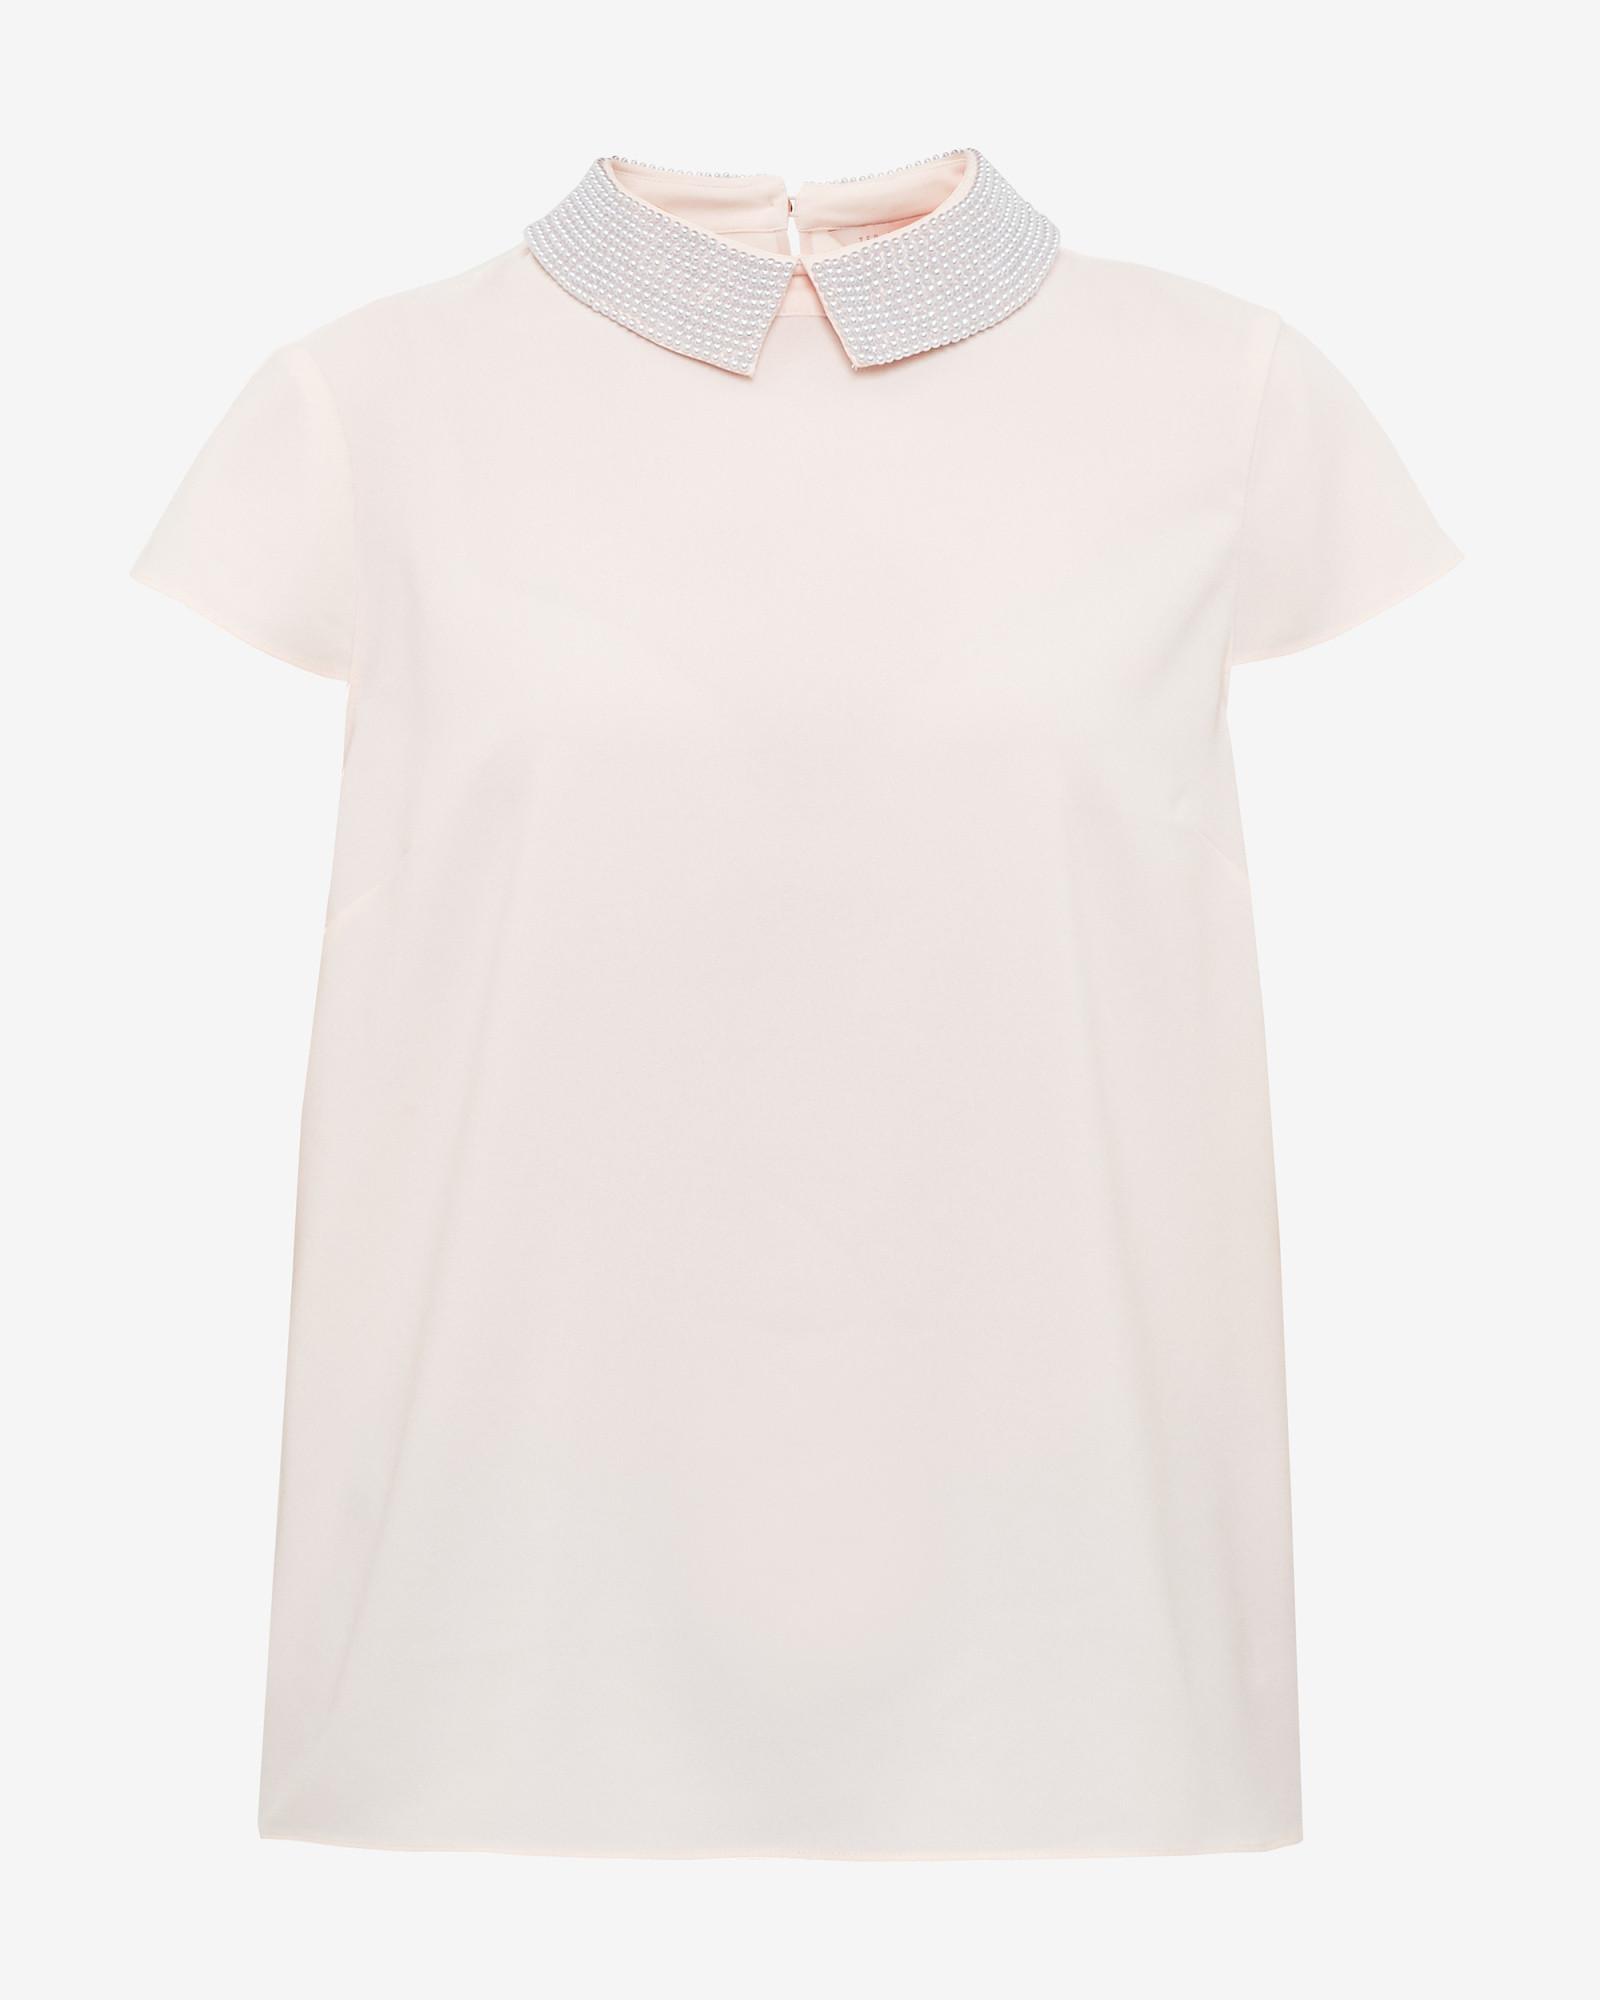 Ted Baker Embellished Pearl Collar Top in Pink | Lyst